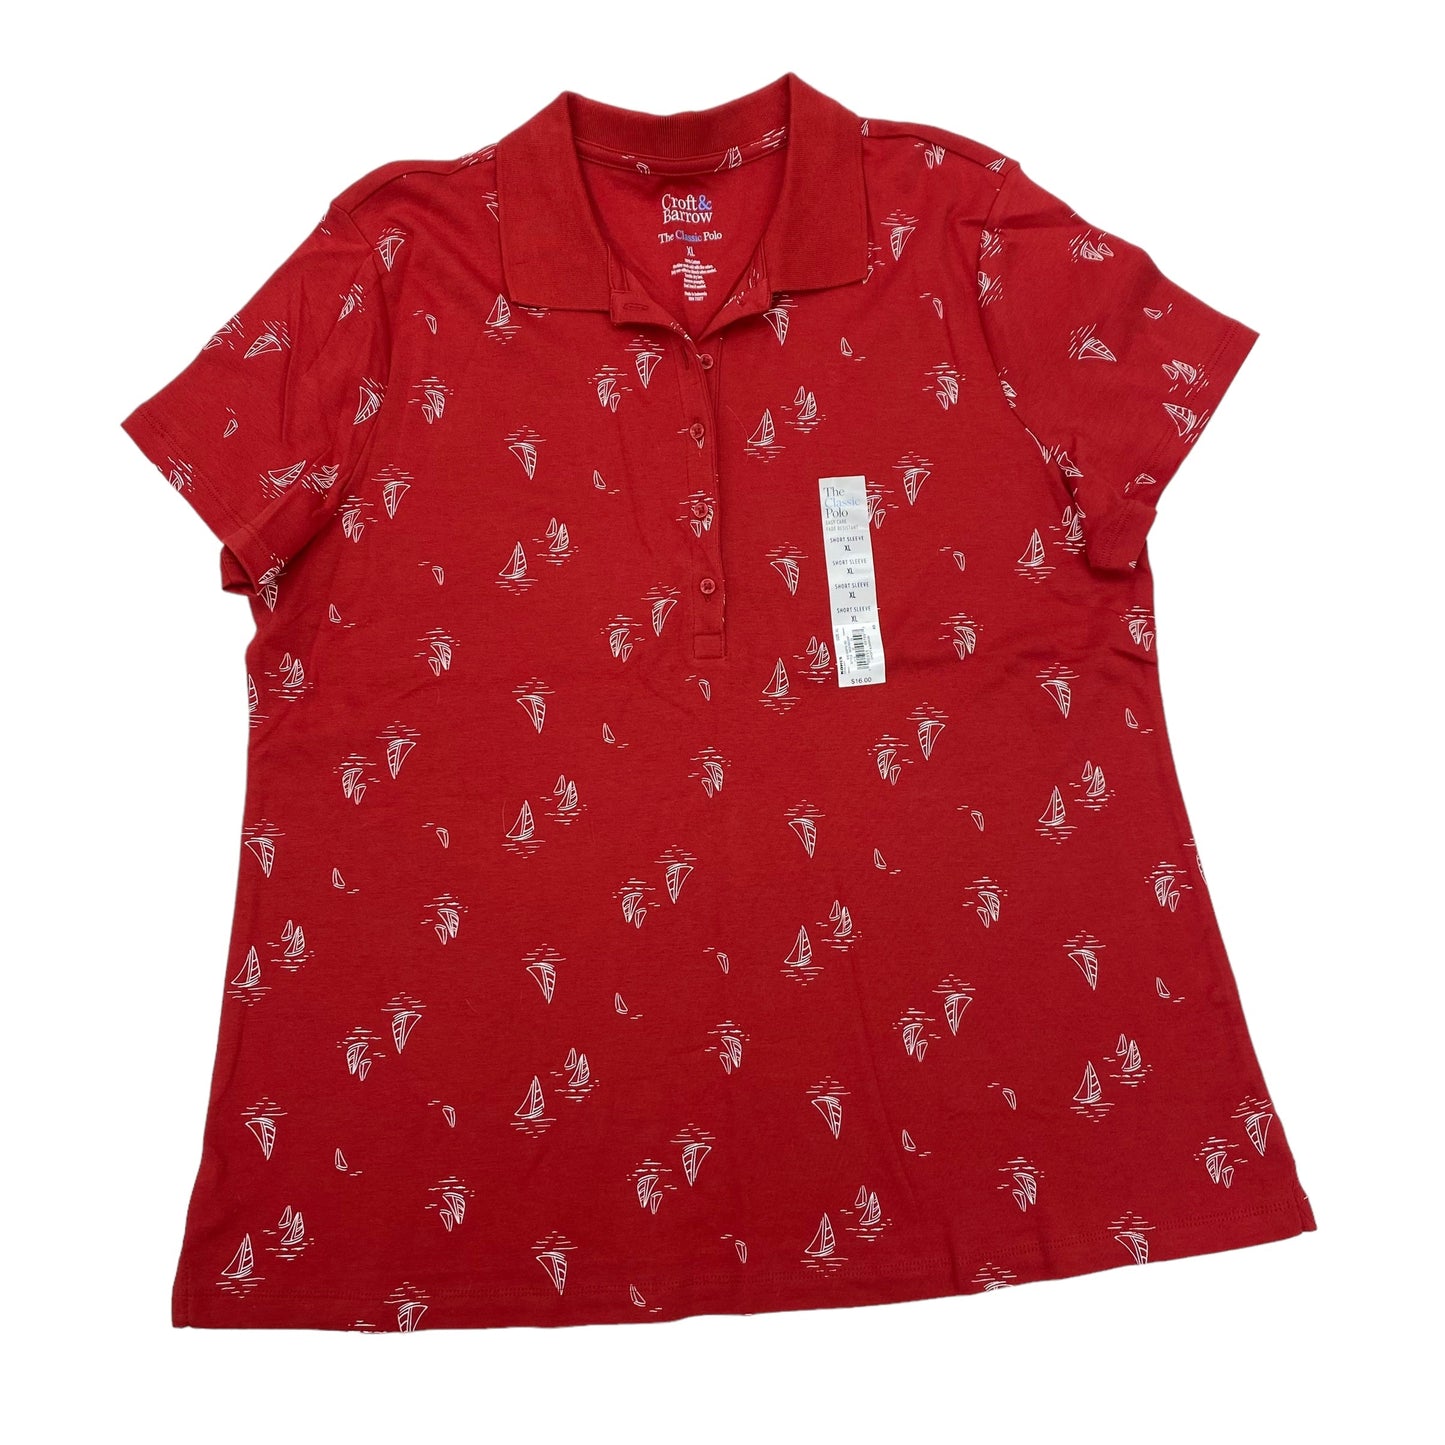 RED TOP SS by CROFT AND BARROW Size:XL